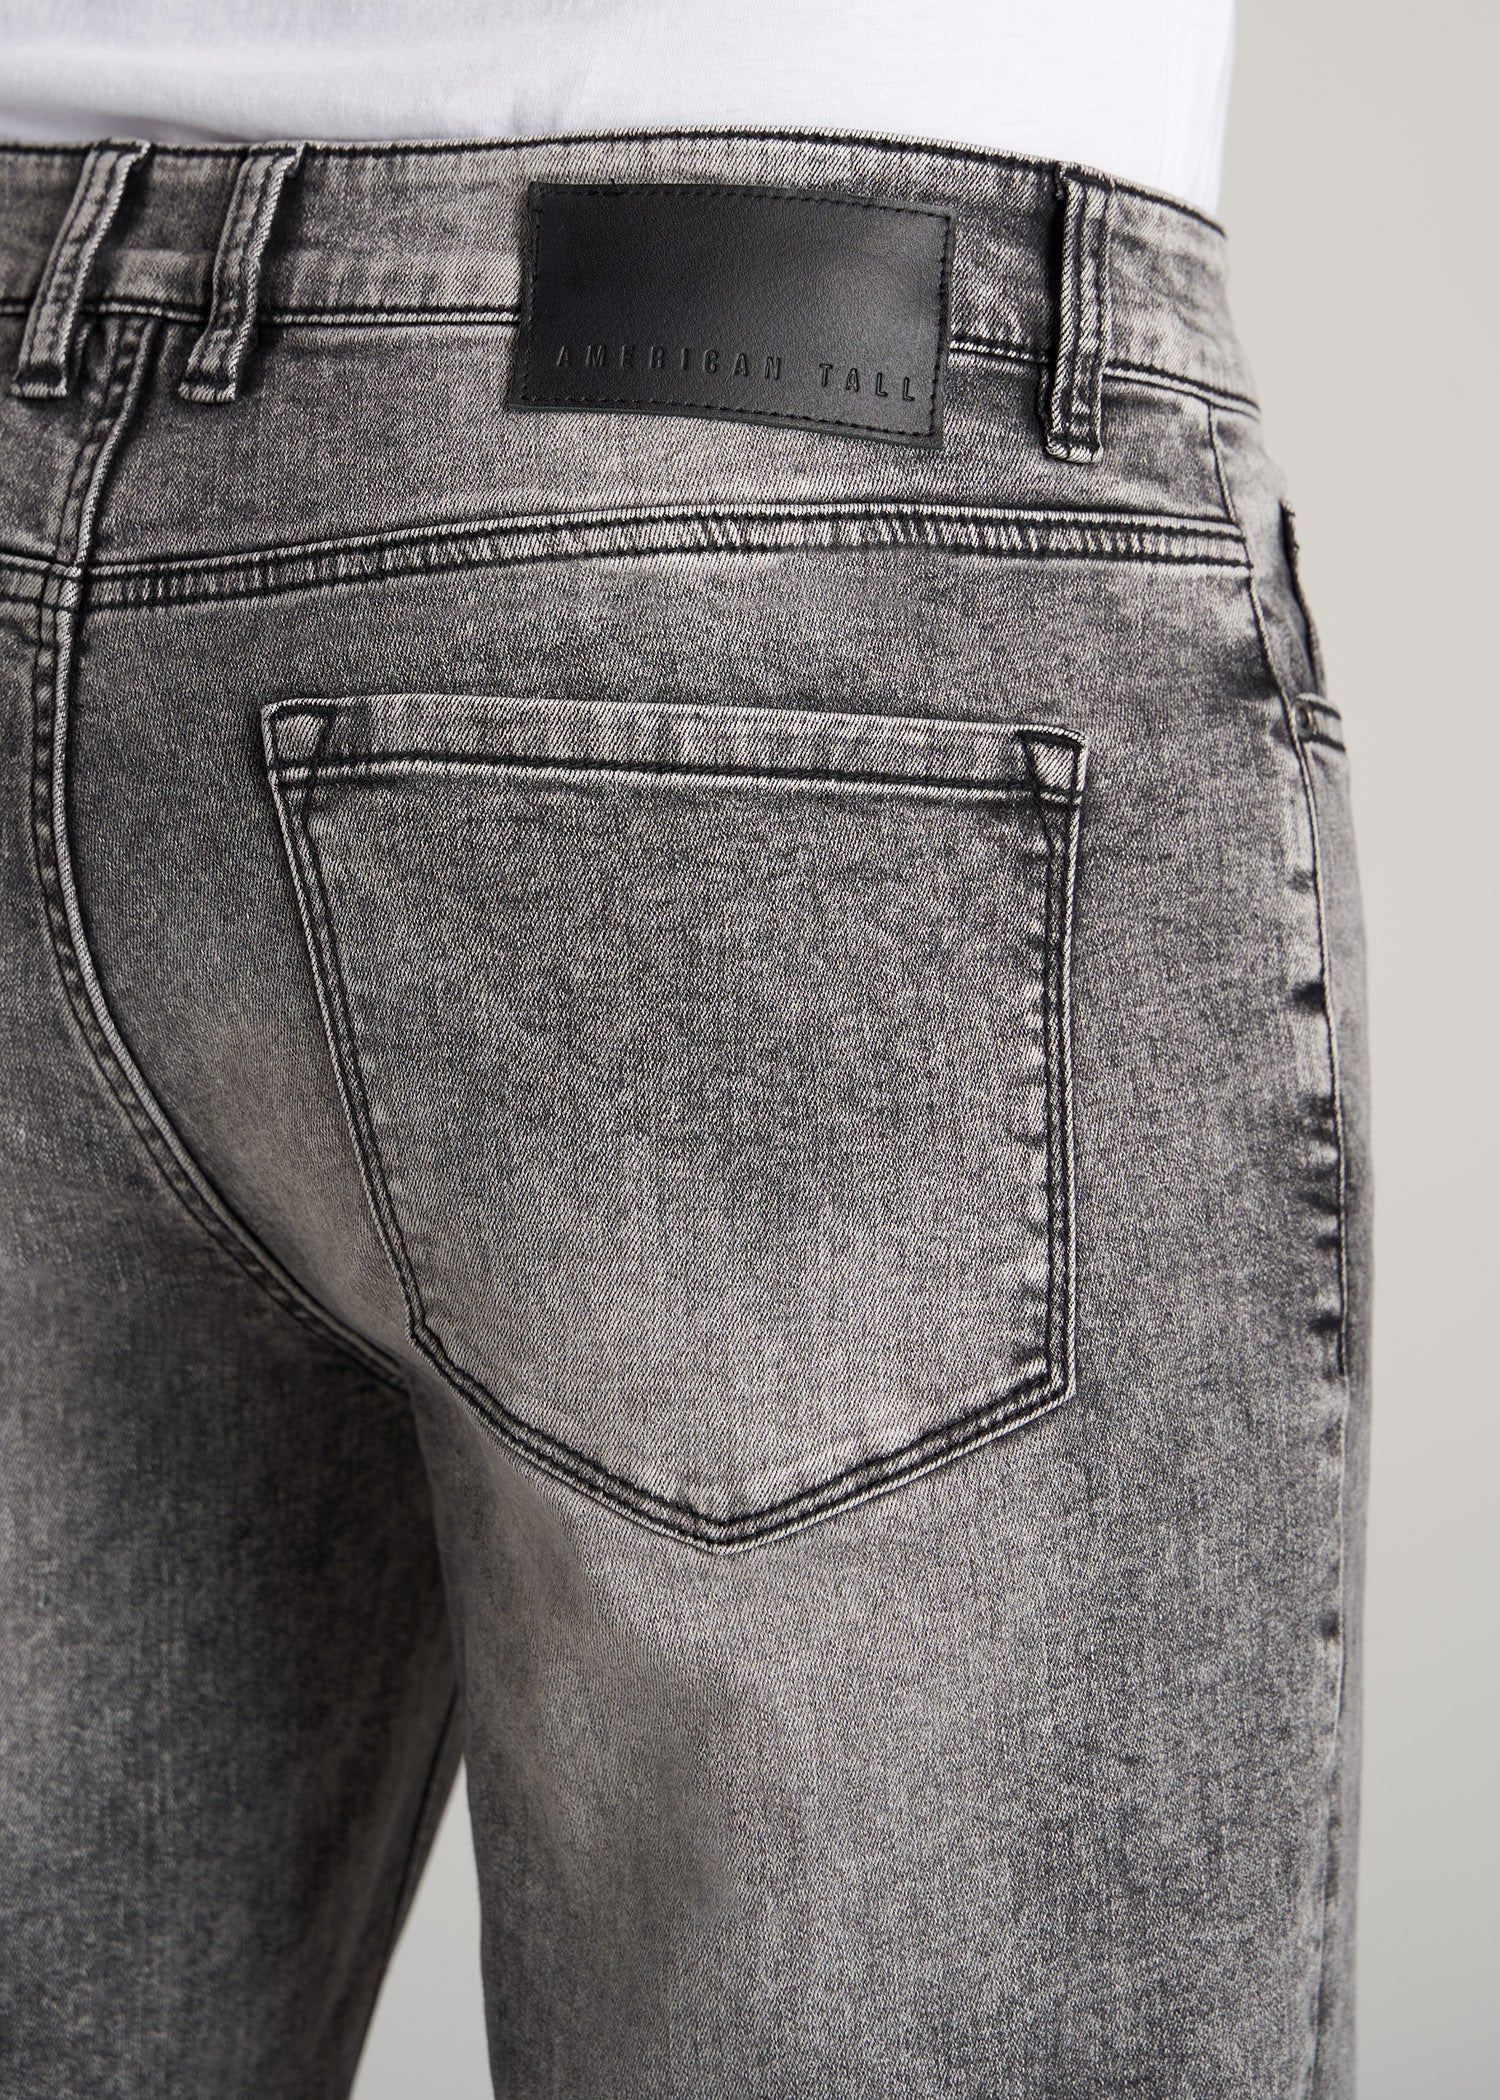 Jeans for Tall Men | American